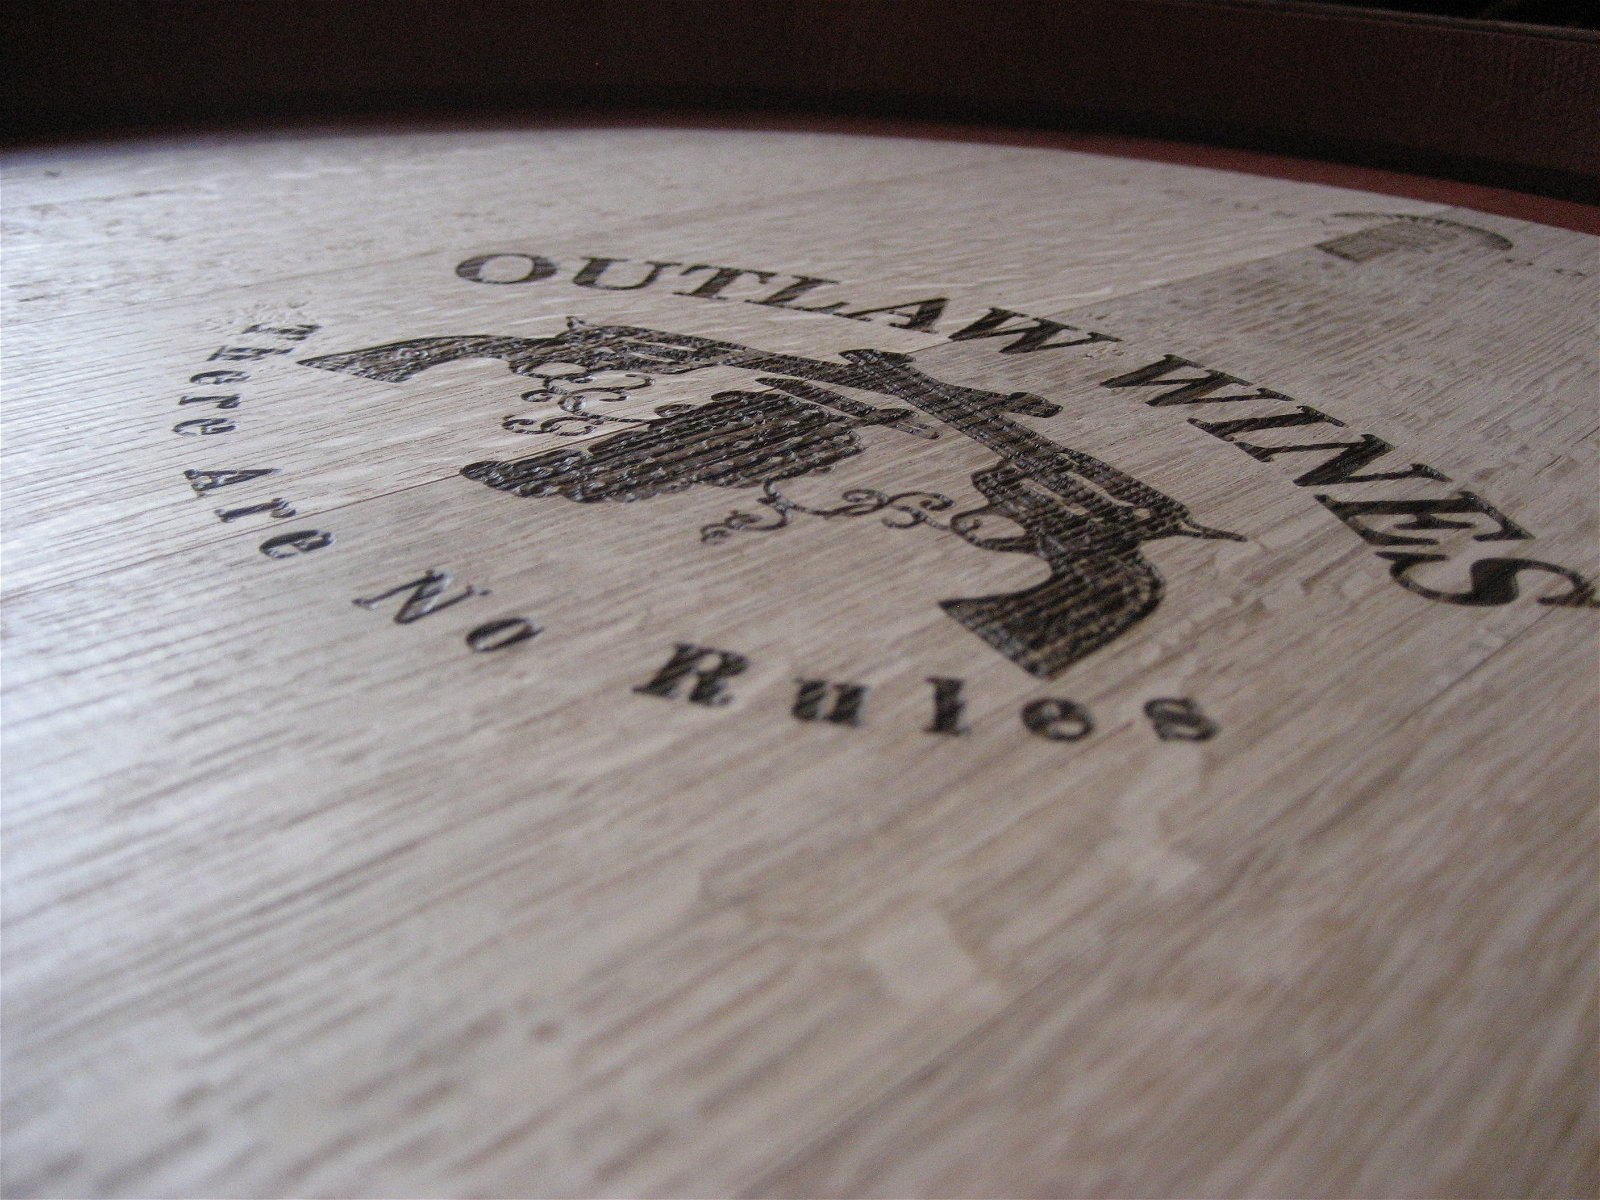 Outlaw Wines - Northern Rivers Accommodation